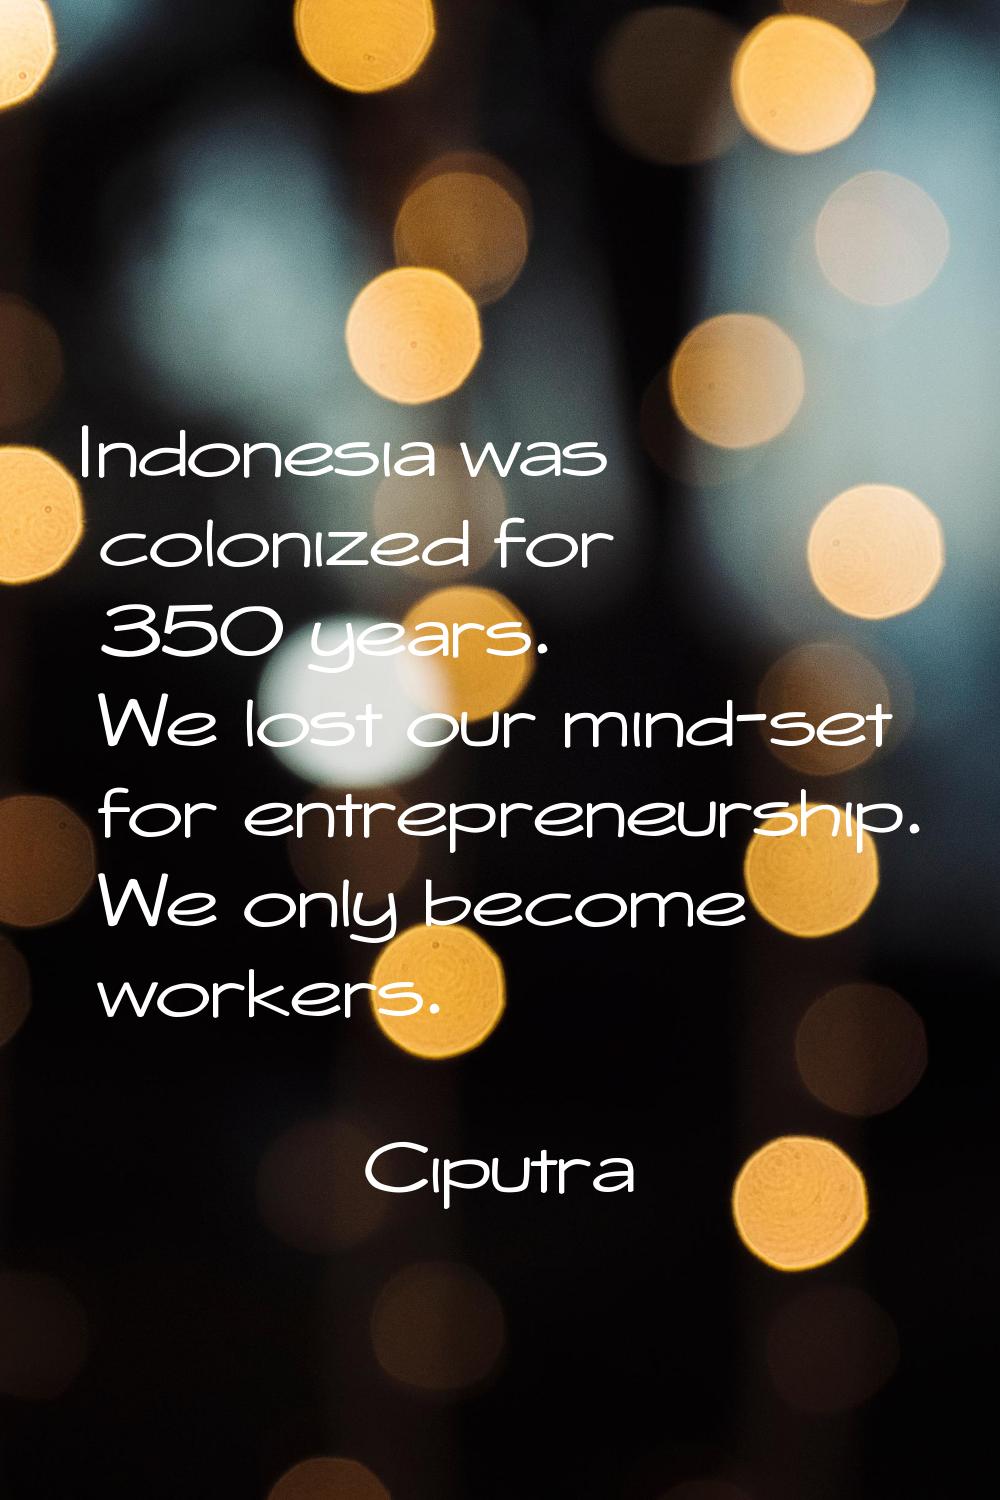 Indonesia was colonized for 350 years. We lost our mind-set for entrepreneurship. We only become wo